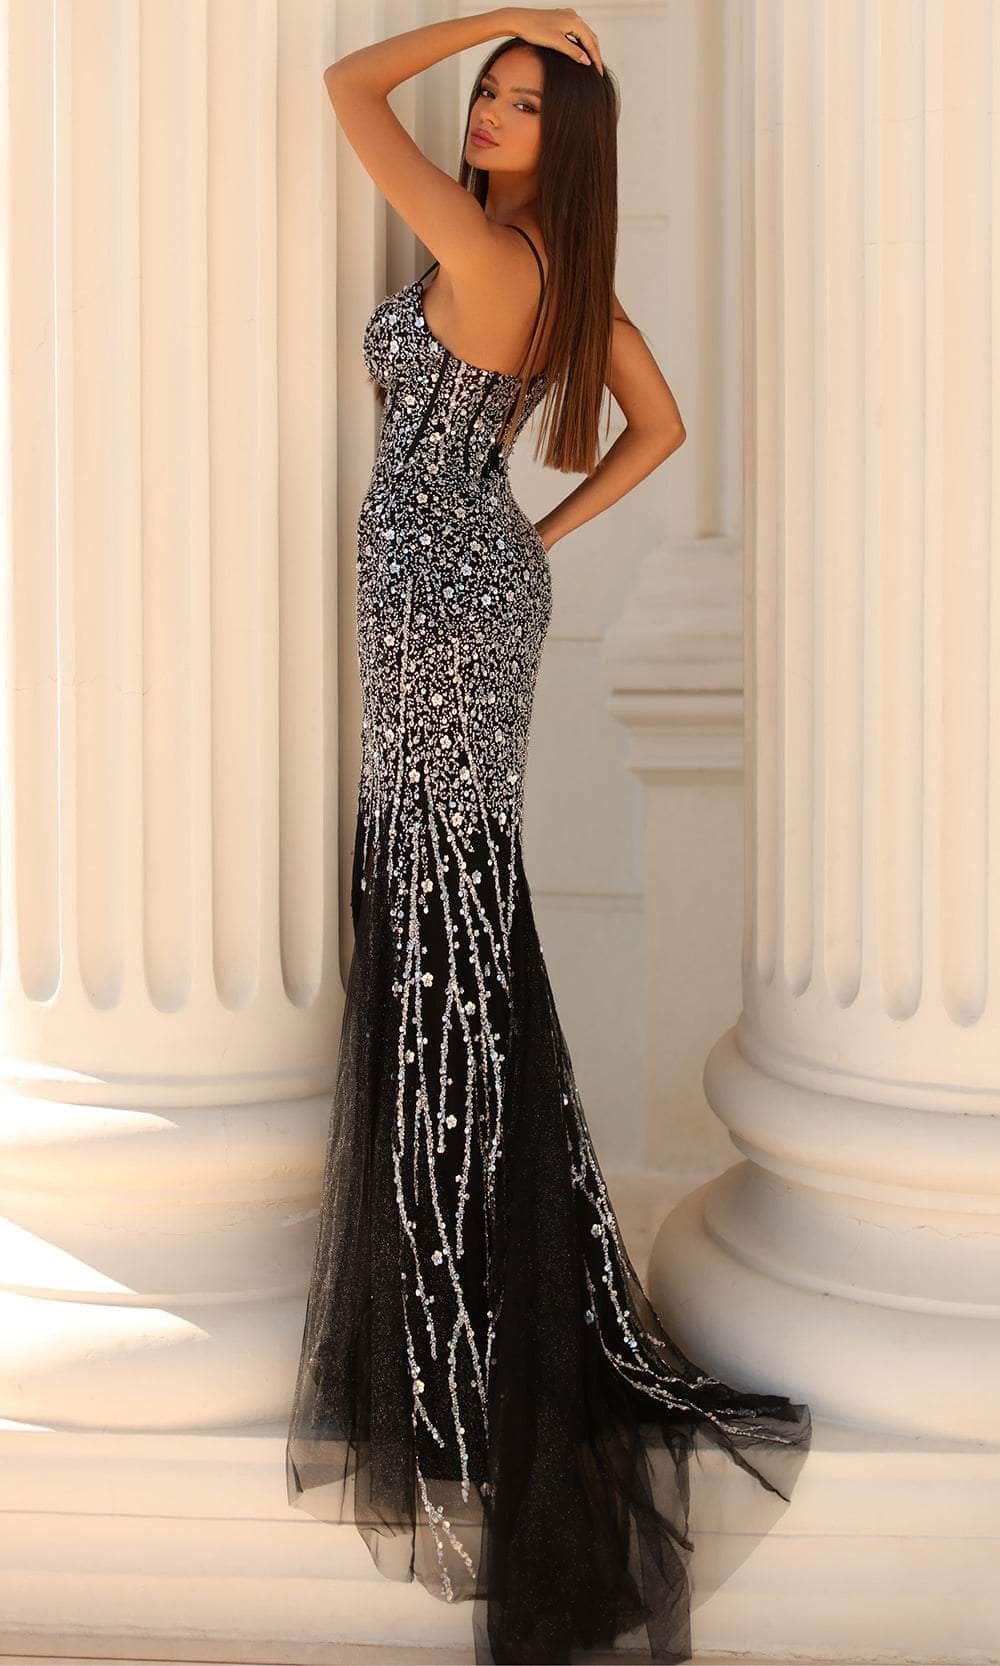 Clarisse 810469 - Embellished Sleeveless Evening Dress Special Occasion Dress